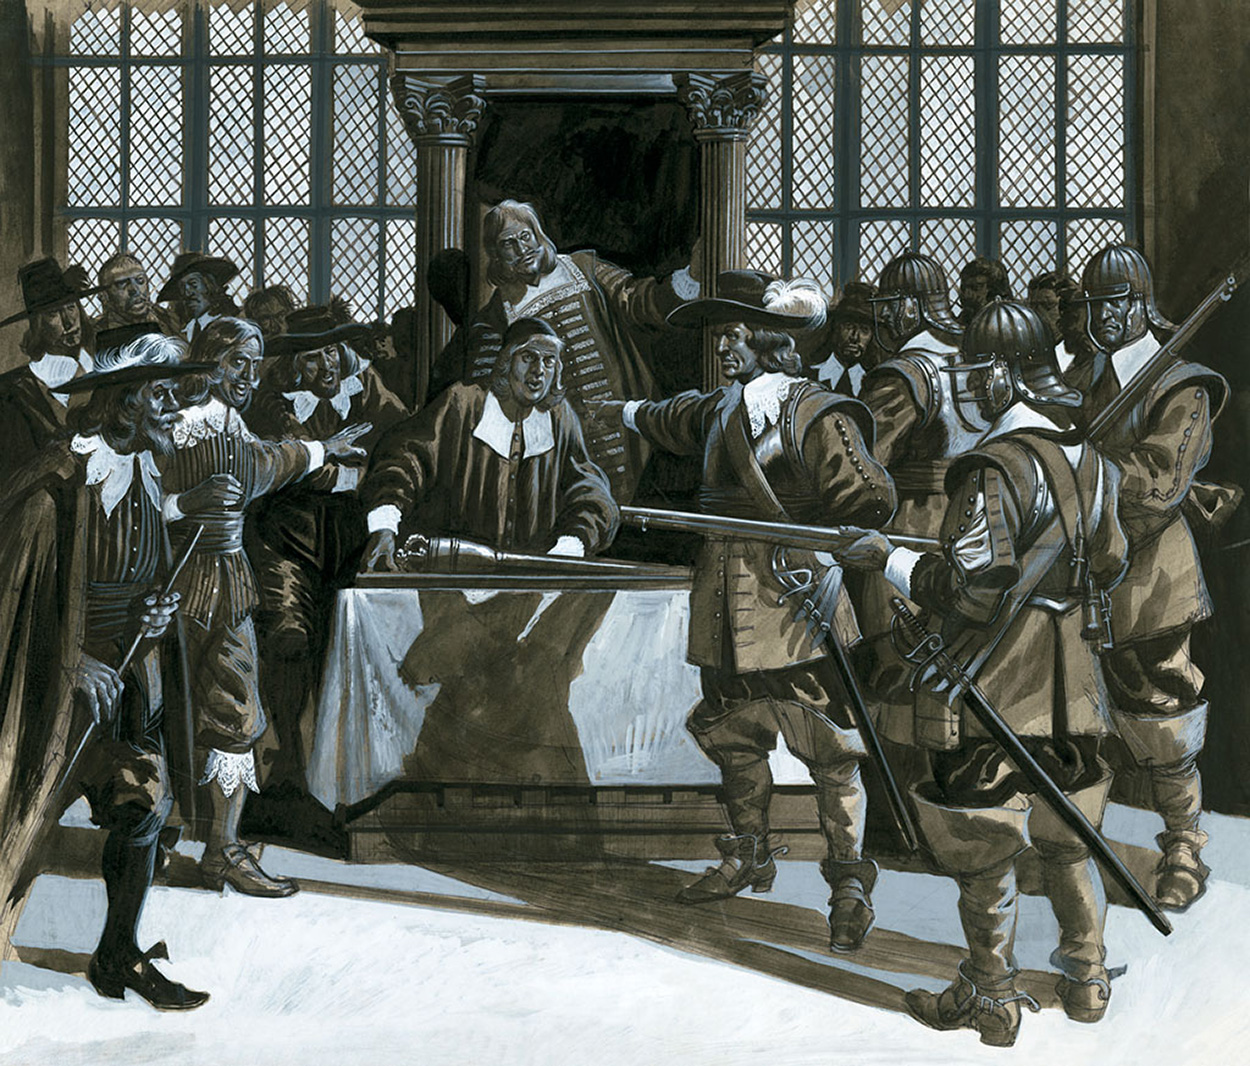 Cromwell In Parliament (Original) art by British History (Ron Embleton) at The Illustration Art Gallery